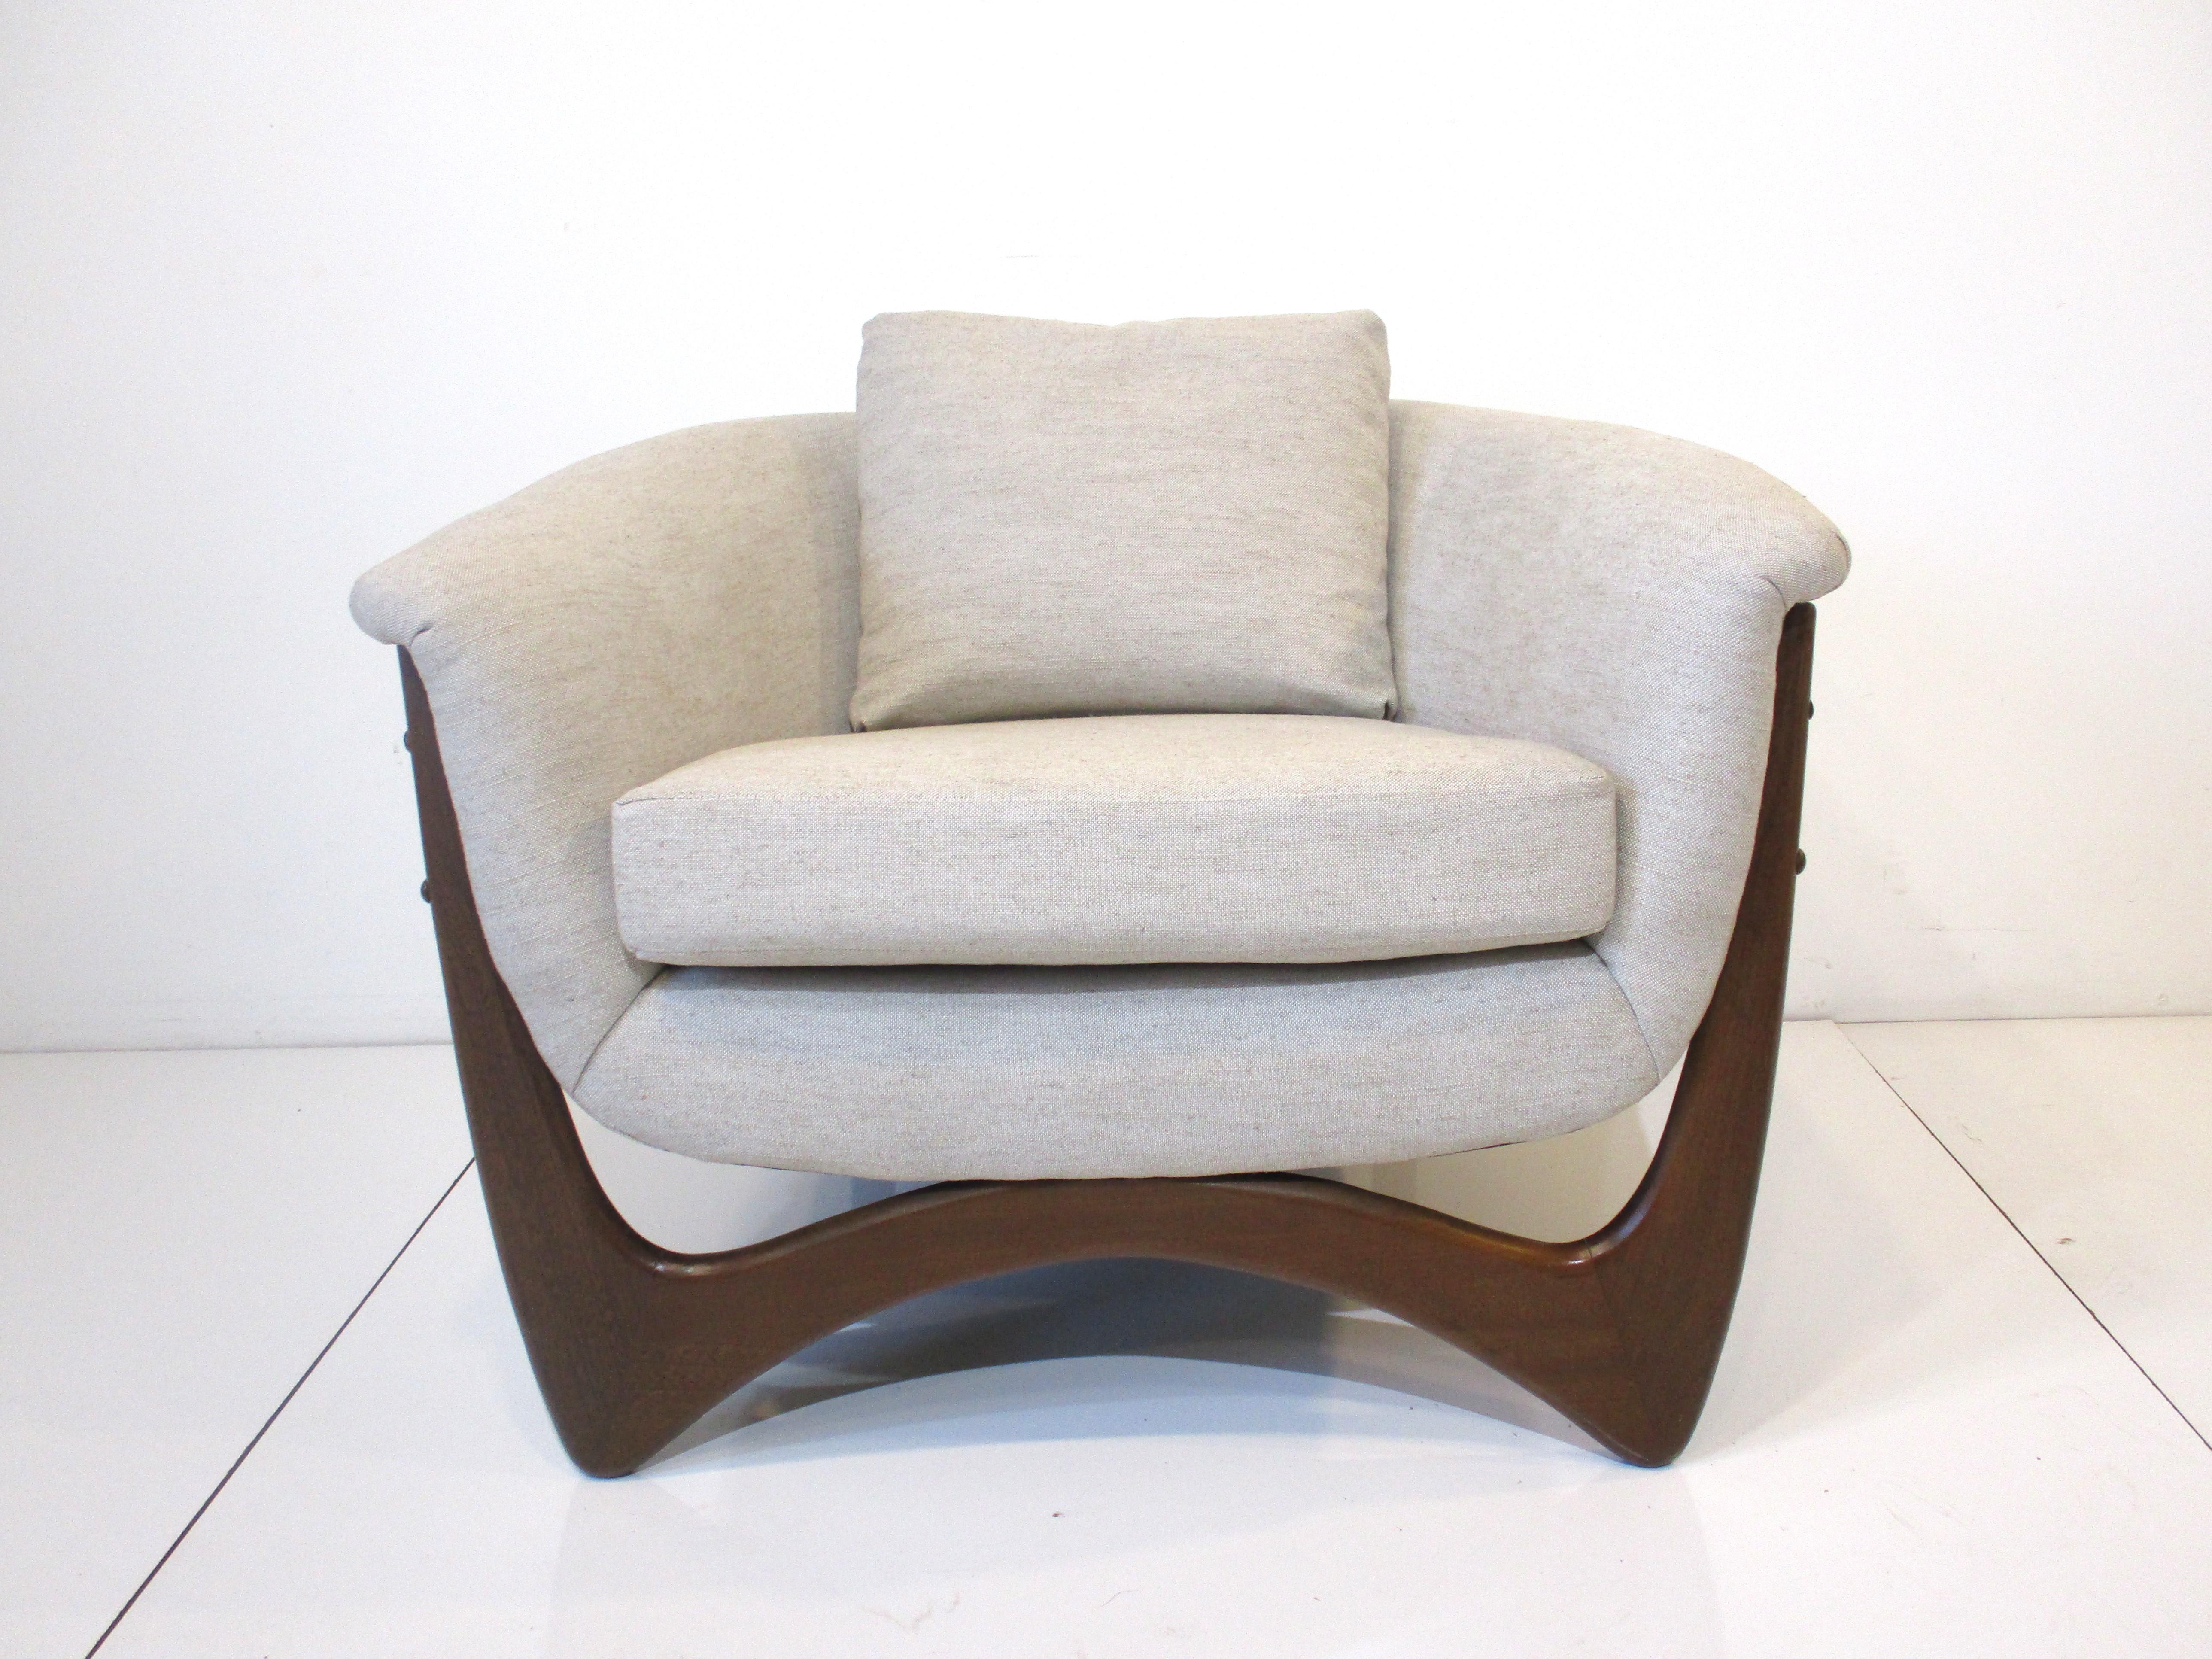 A fully restored rounded backed lounge chair upholstered in a tightly woven contract fabric in a blend of sand, beige and cream. Designed for comfort with slightly tilted back and arms with loose back and bottom cushions. Having dark sculptural wood